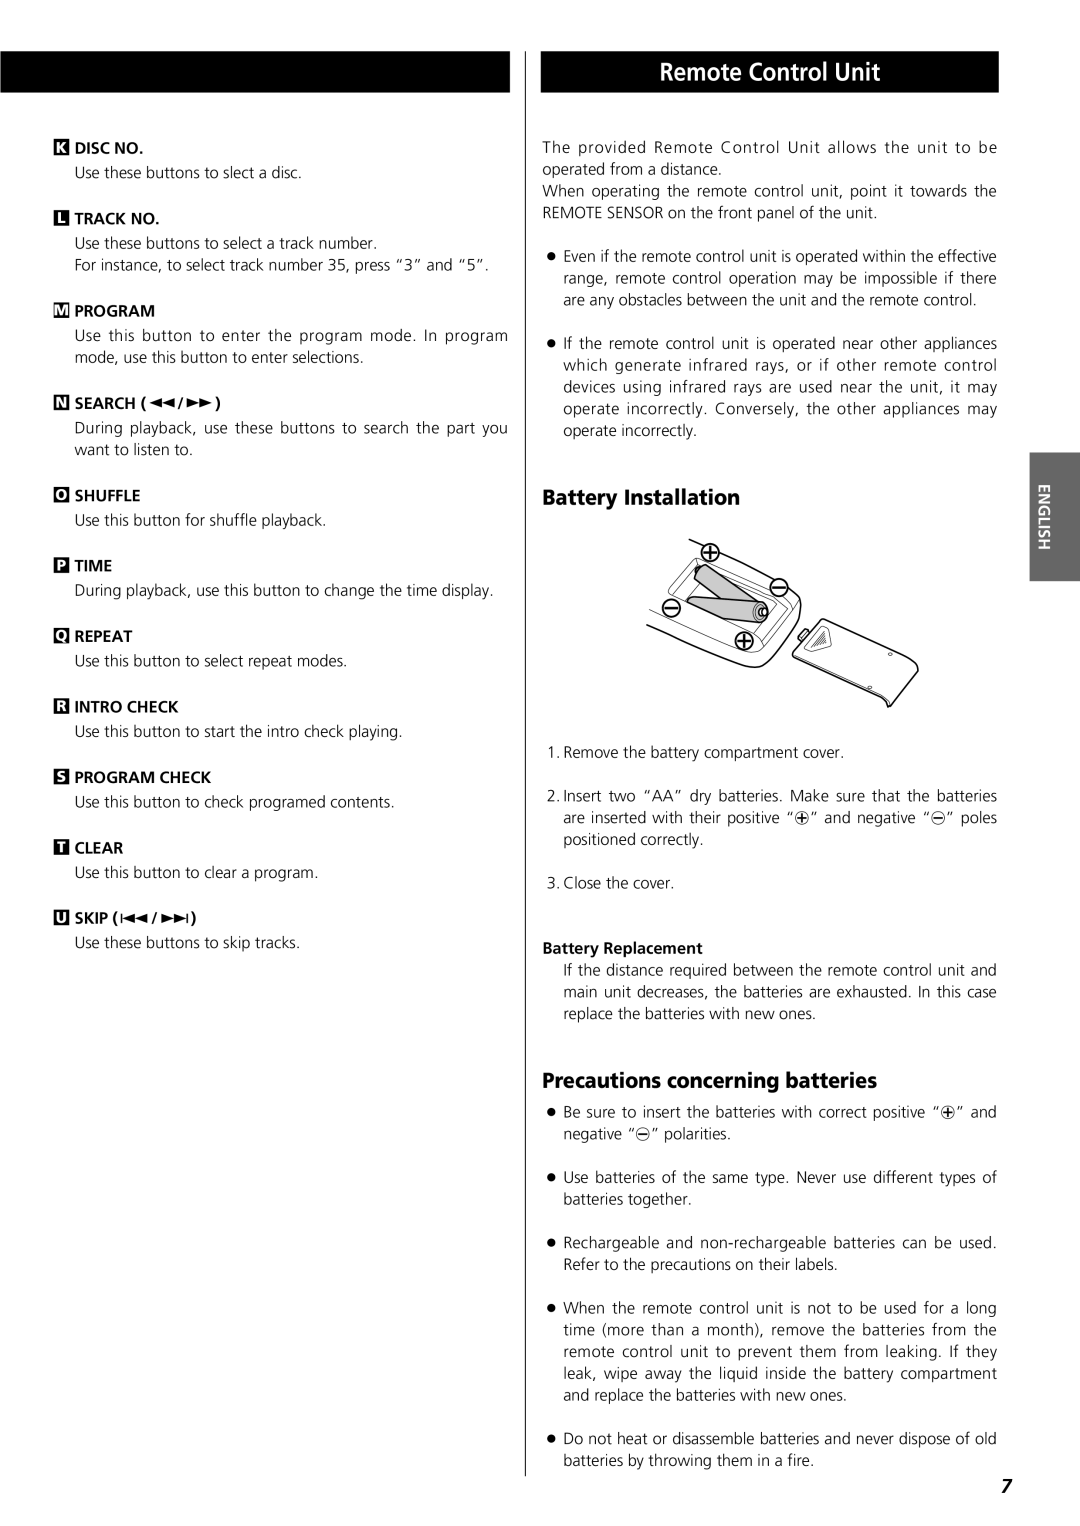 Teac PD-D2610 owner manual Remote Control Unit, Battery Installation, Precautions concerning batteries 